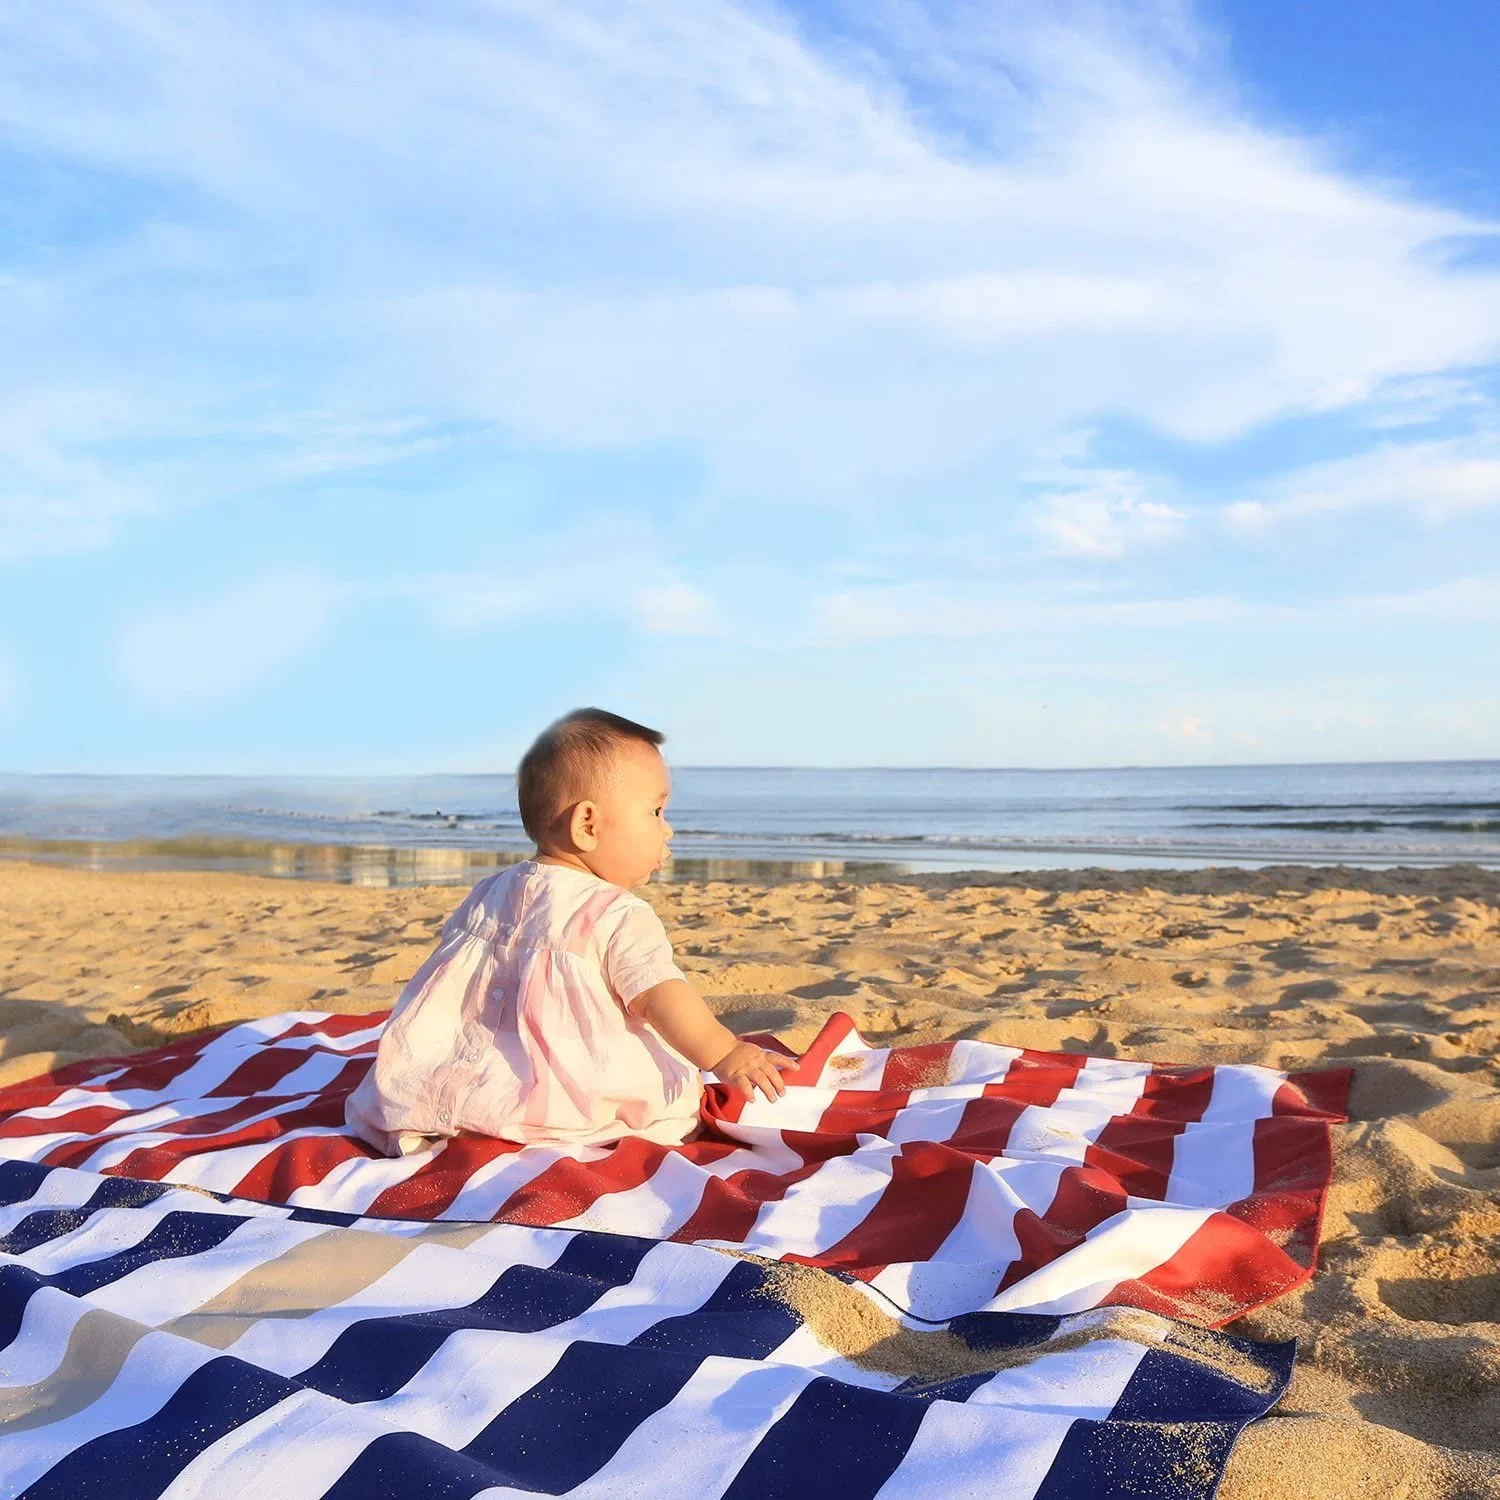 Microfiber Beach Towel for Travel, Extra Large Towel, Large Towel, Sand Free Towel, Thin Towel, Lightweight Towel, Compact Towel, Striped Towel